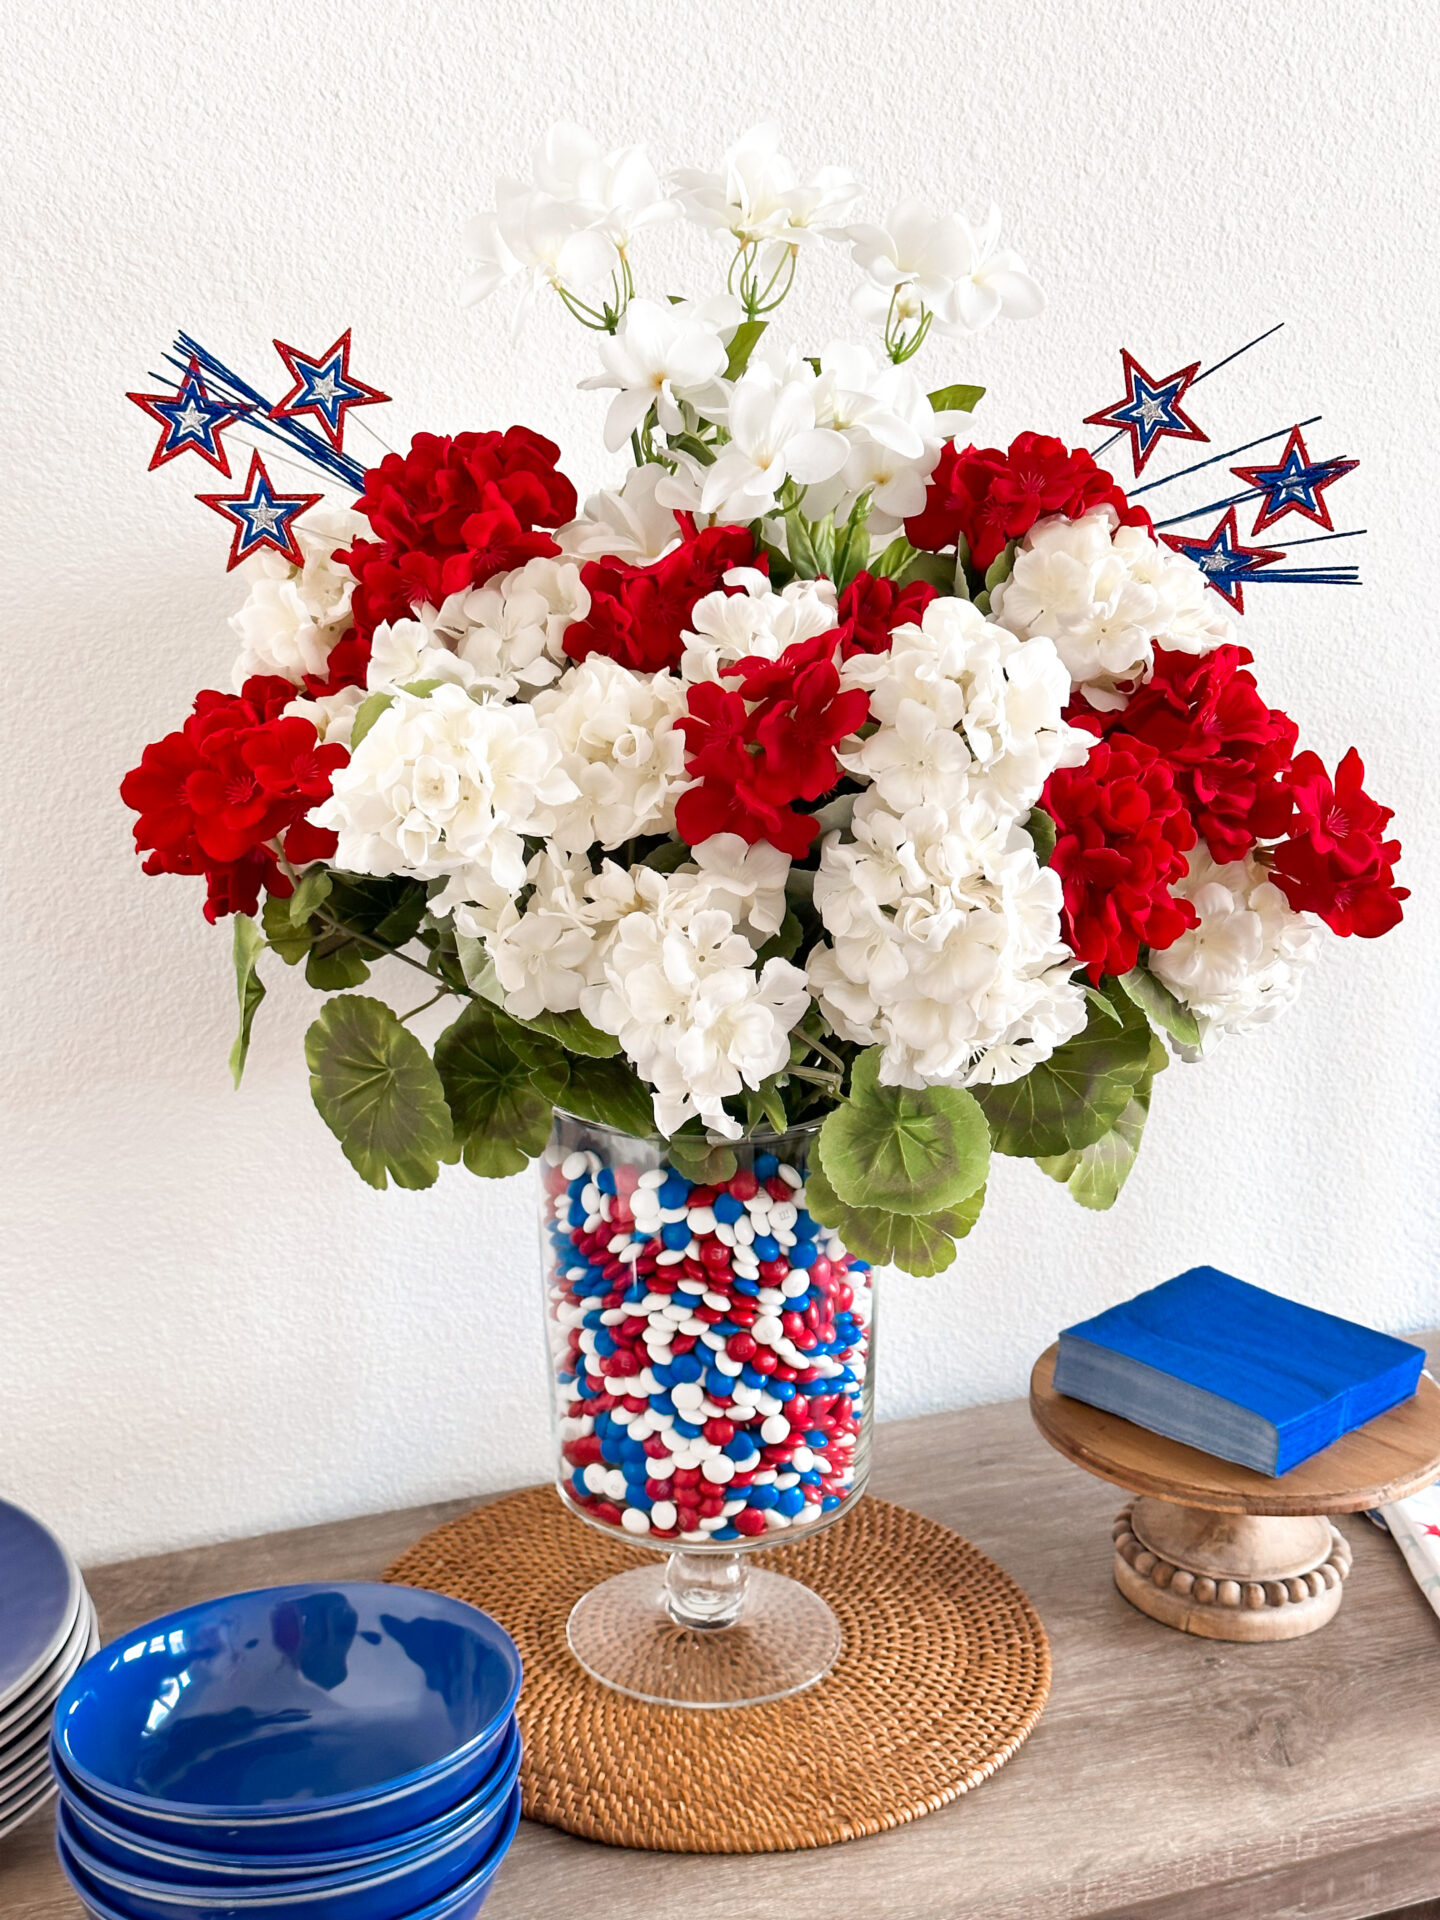 red, white and blue floral arrangement for Fourth of July | 5 Summer Ideas | Summer Recipes and Fourth of July Decor Inspo